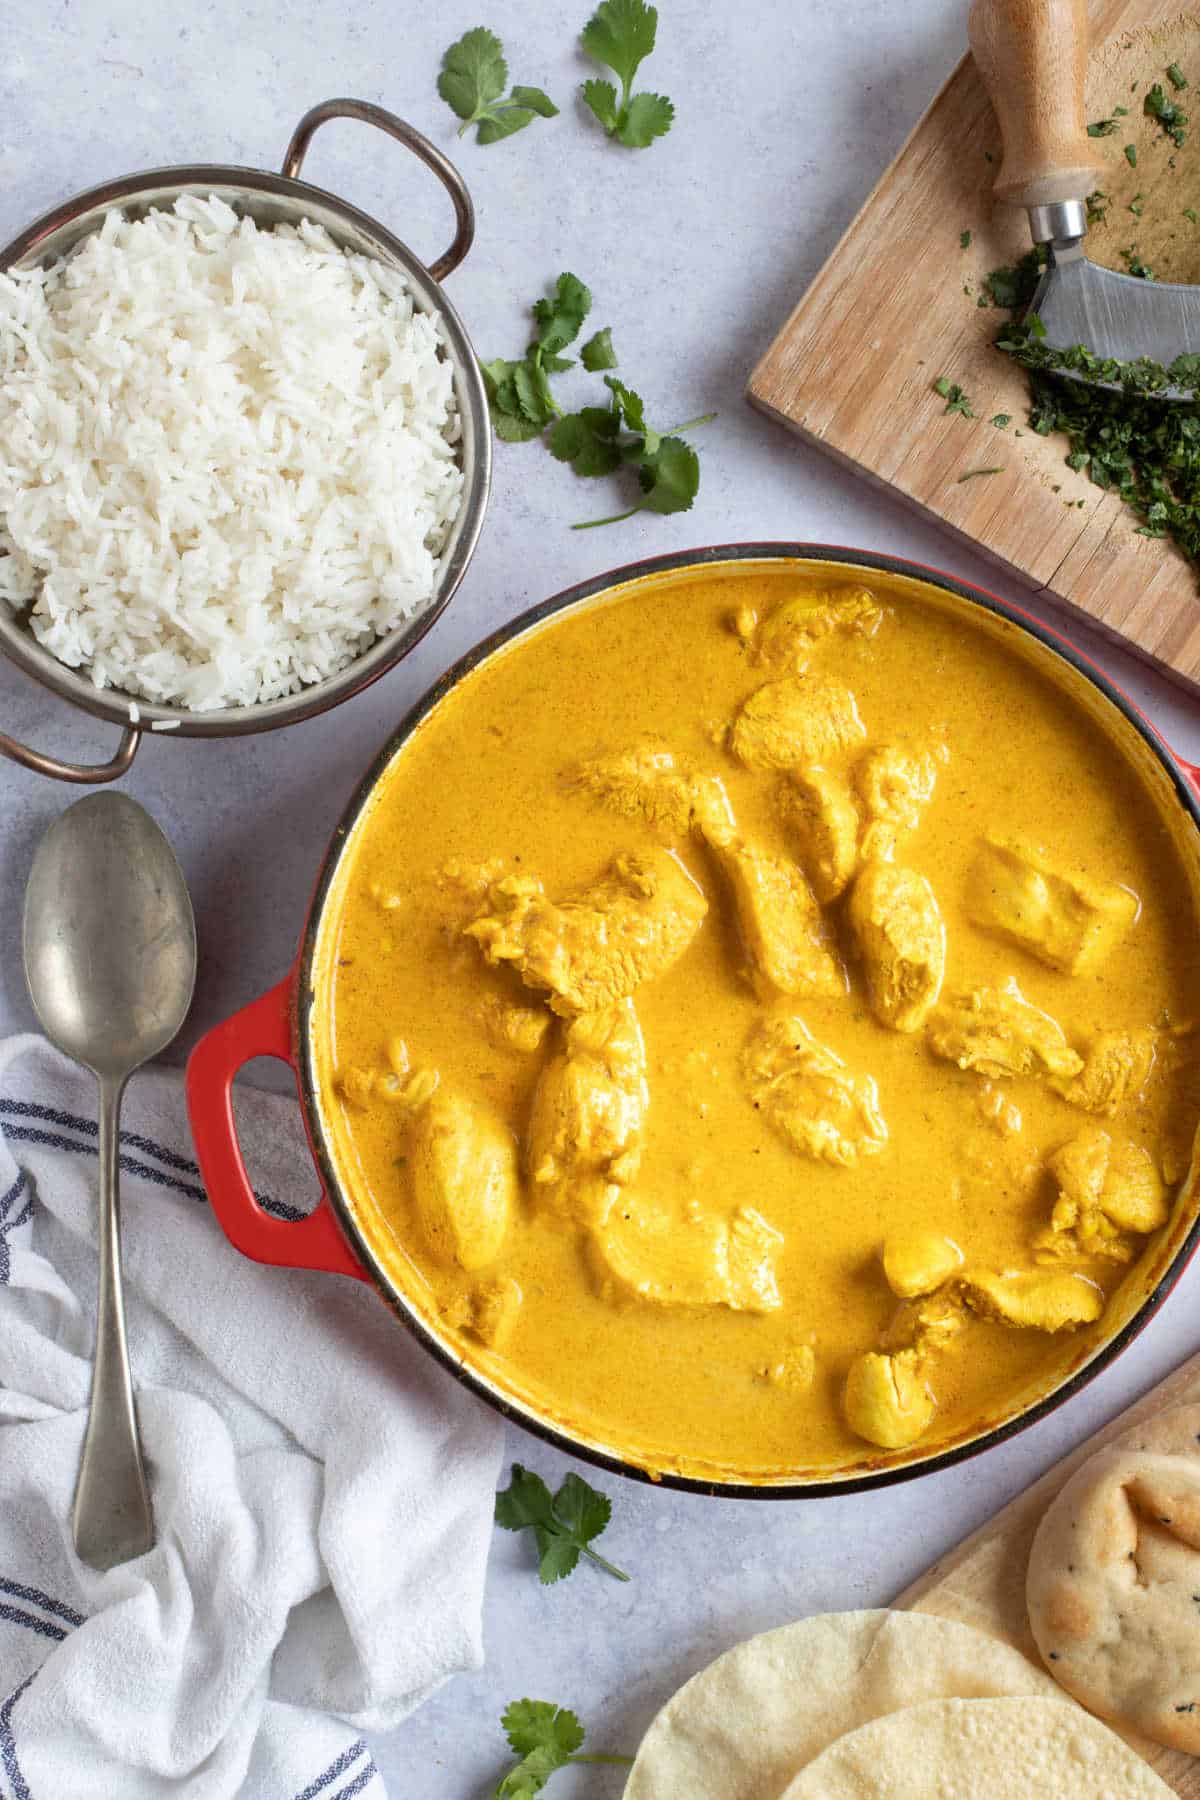 Chicken korma with a side of basmati rice.